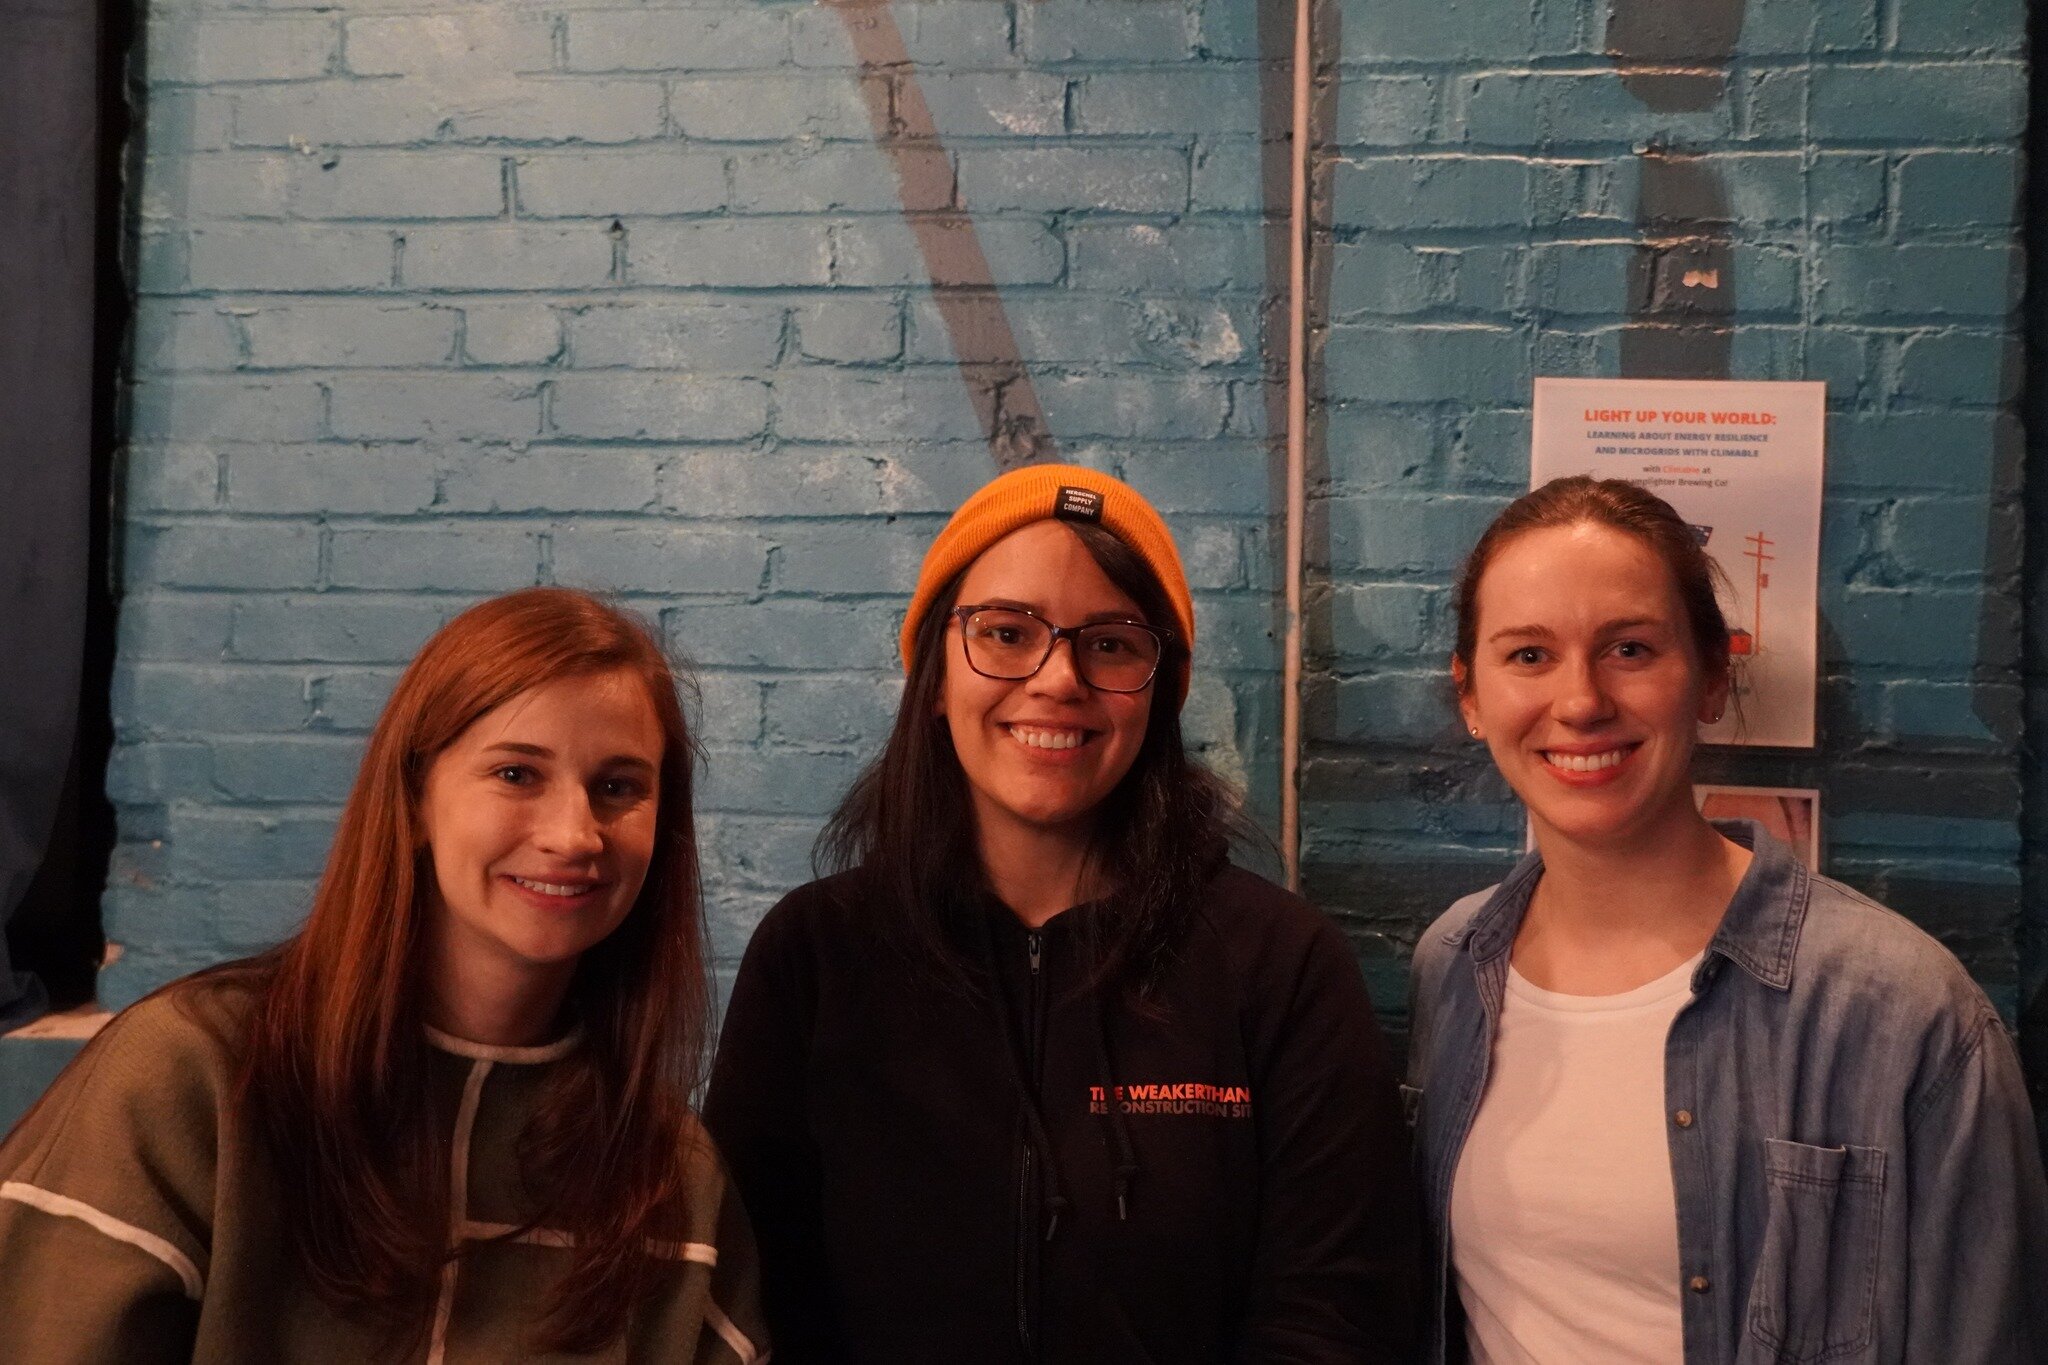 Light Up Your World was a bright spot for Climable ⚡️💡 Last Thursday, Climable held an educational event at Lamplighter to engage with folks about energy resilience and microgrids, and to share a bit about our projects. We got to meet so many wonder